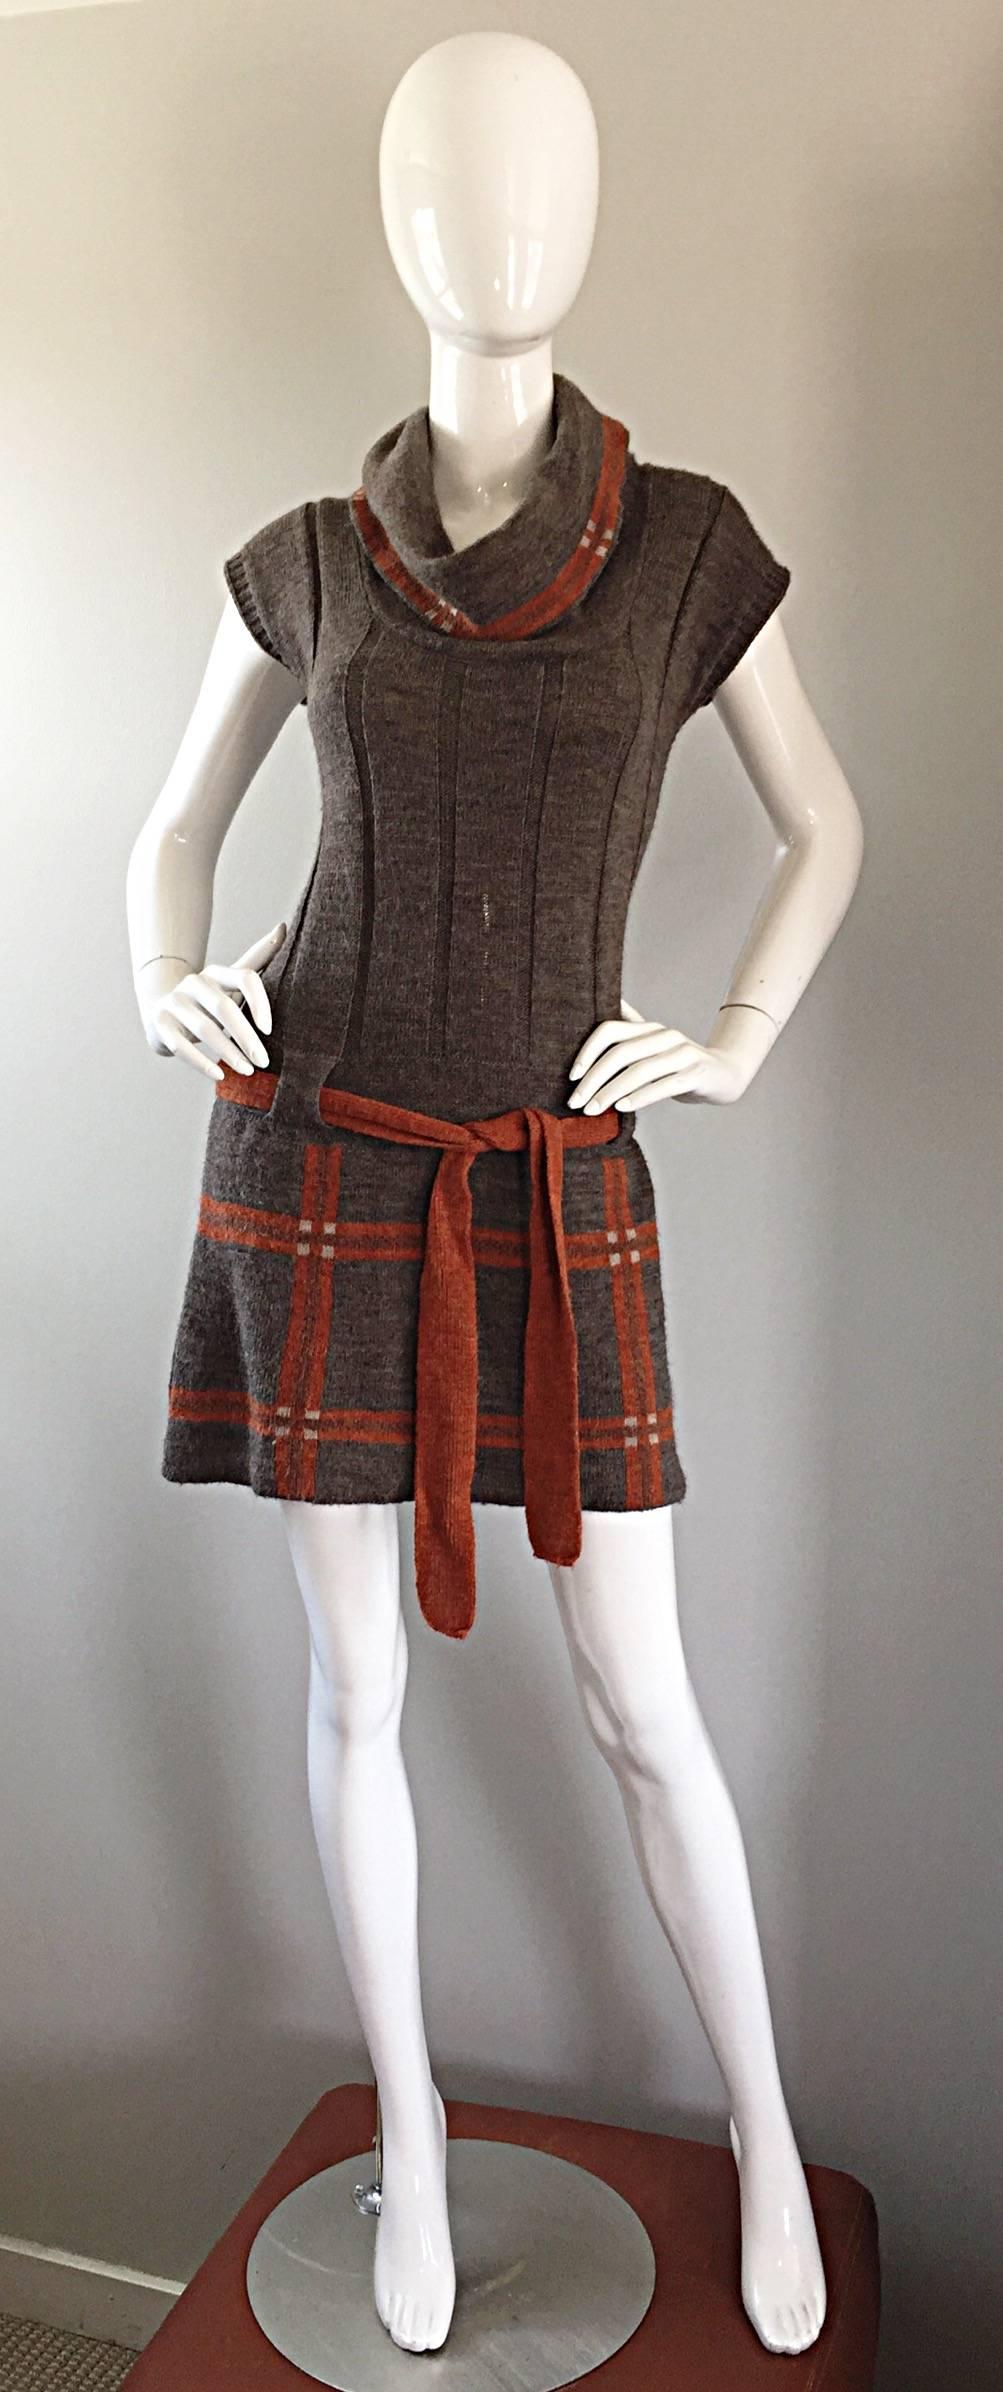 Adorable vintage COCOGIO (Made in ITALY) short sleeve sweater dress! Heather grey / light brown lightweight wool, with burnt orange and Ivory plaid, and a burnt orange matching belt. Amazing cowl neck that can be worn multiple ways. Looks great with